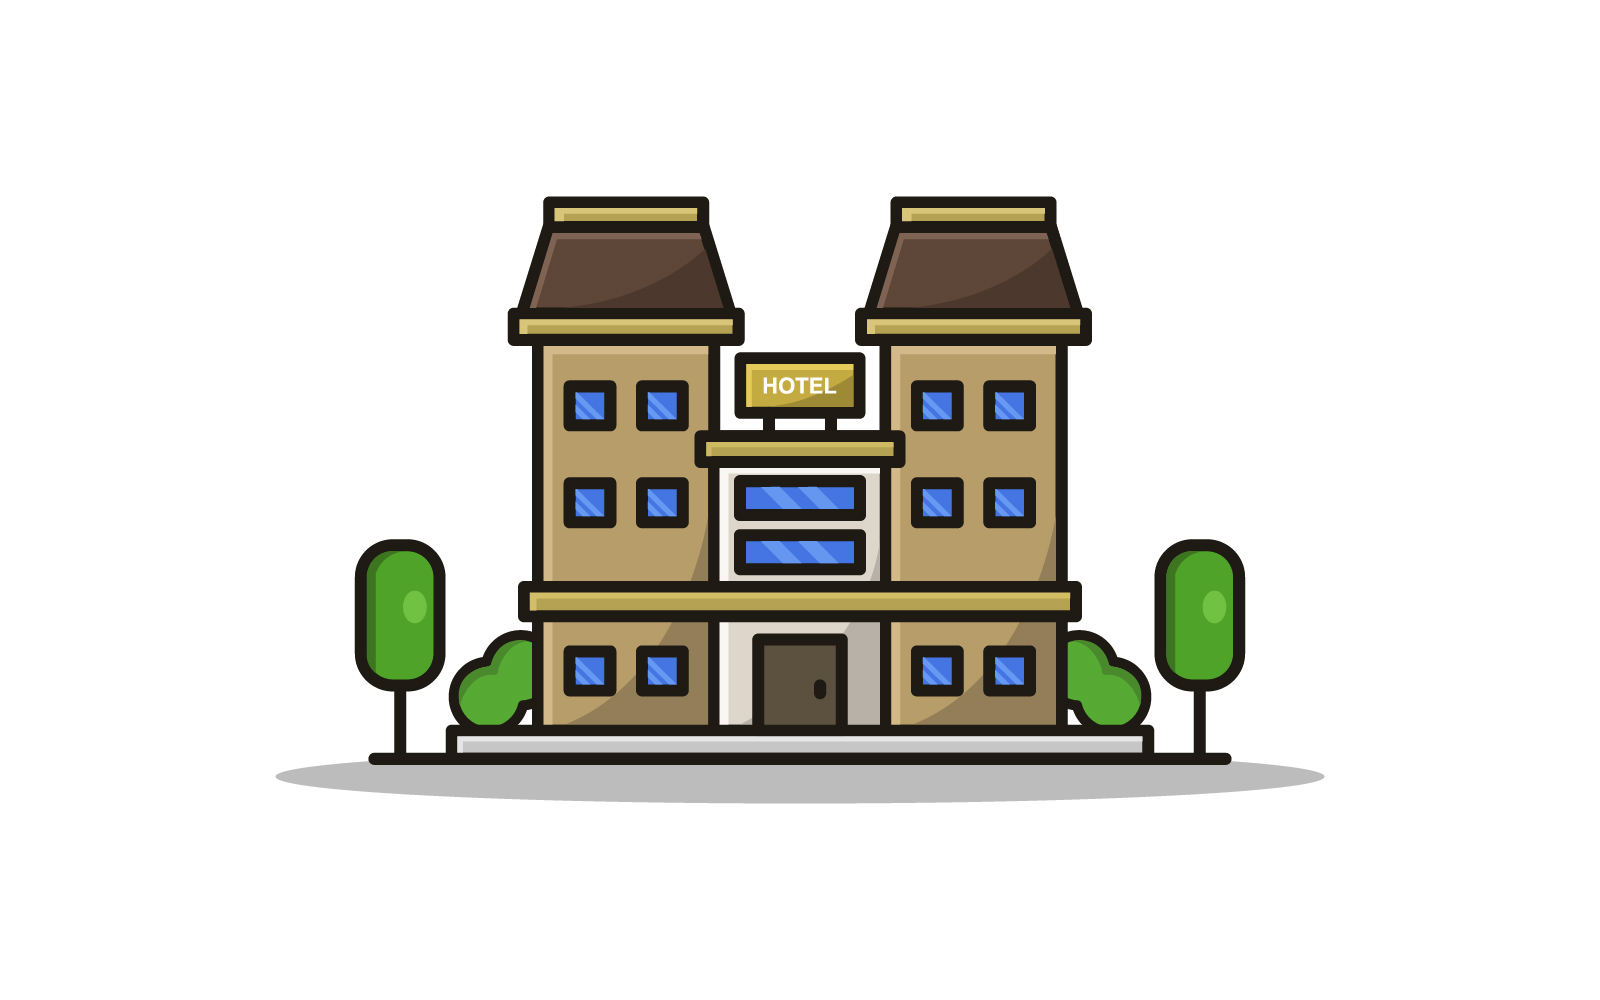 Hotel illustrated in vector on a white